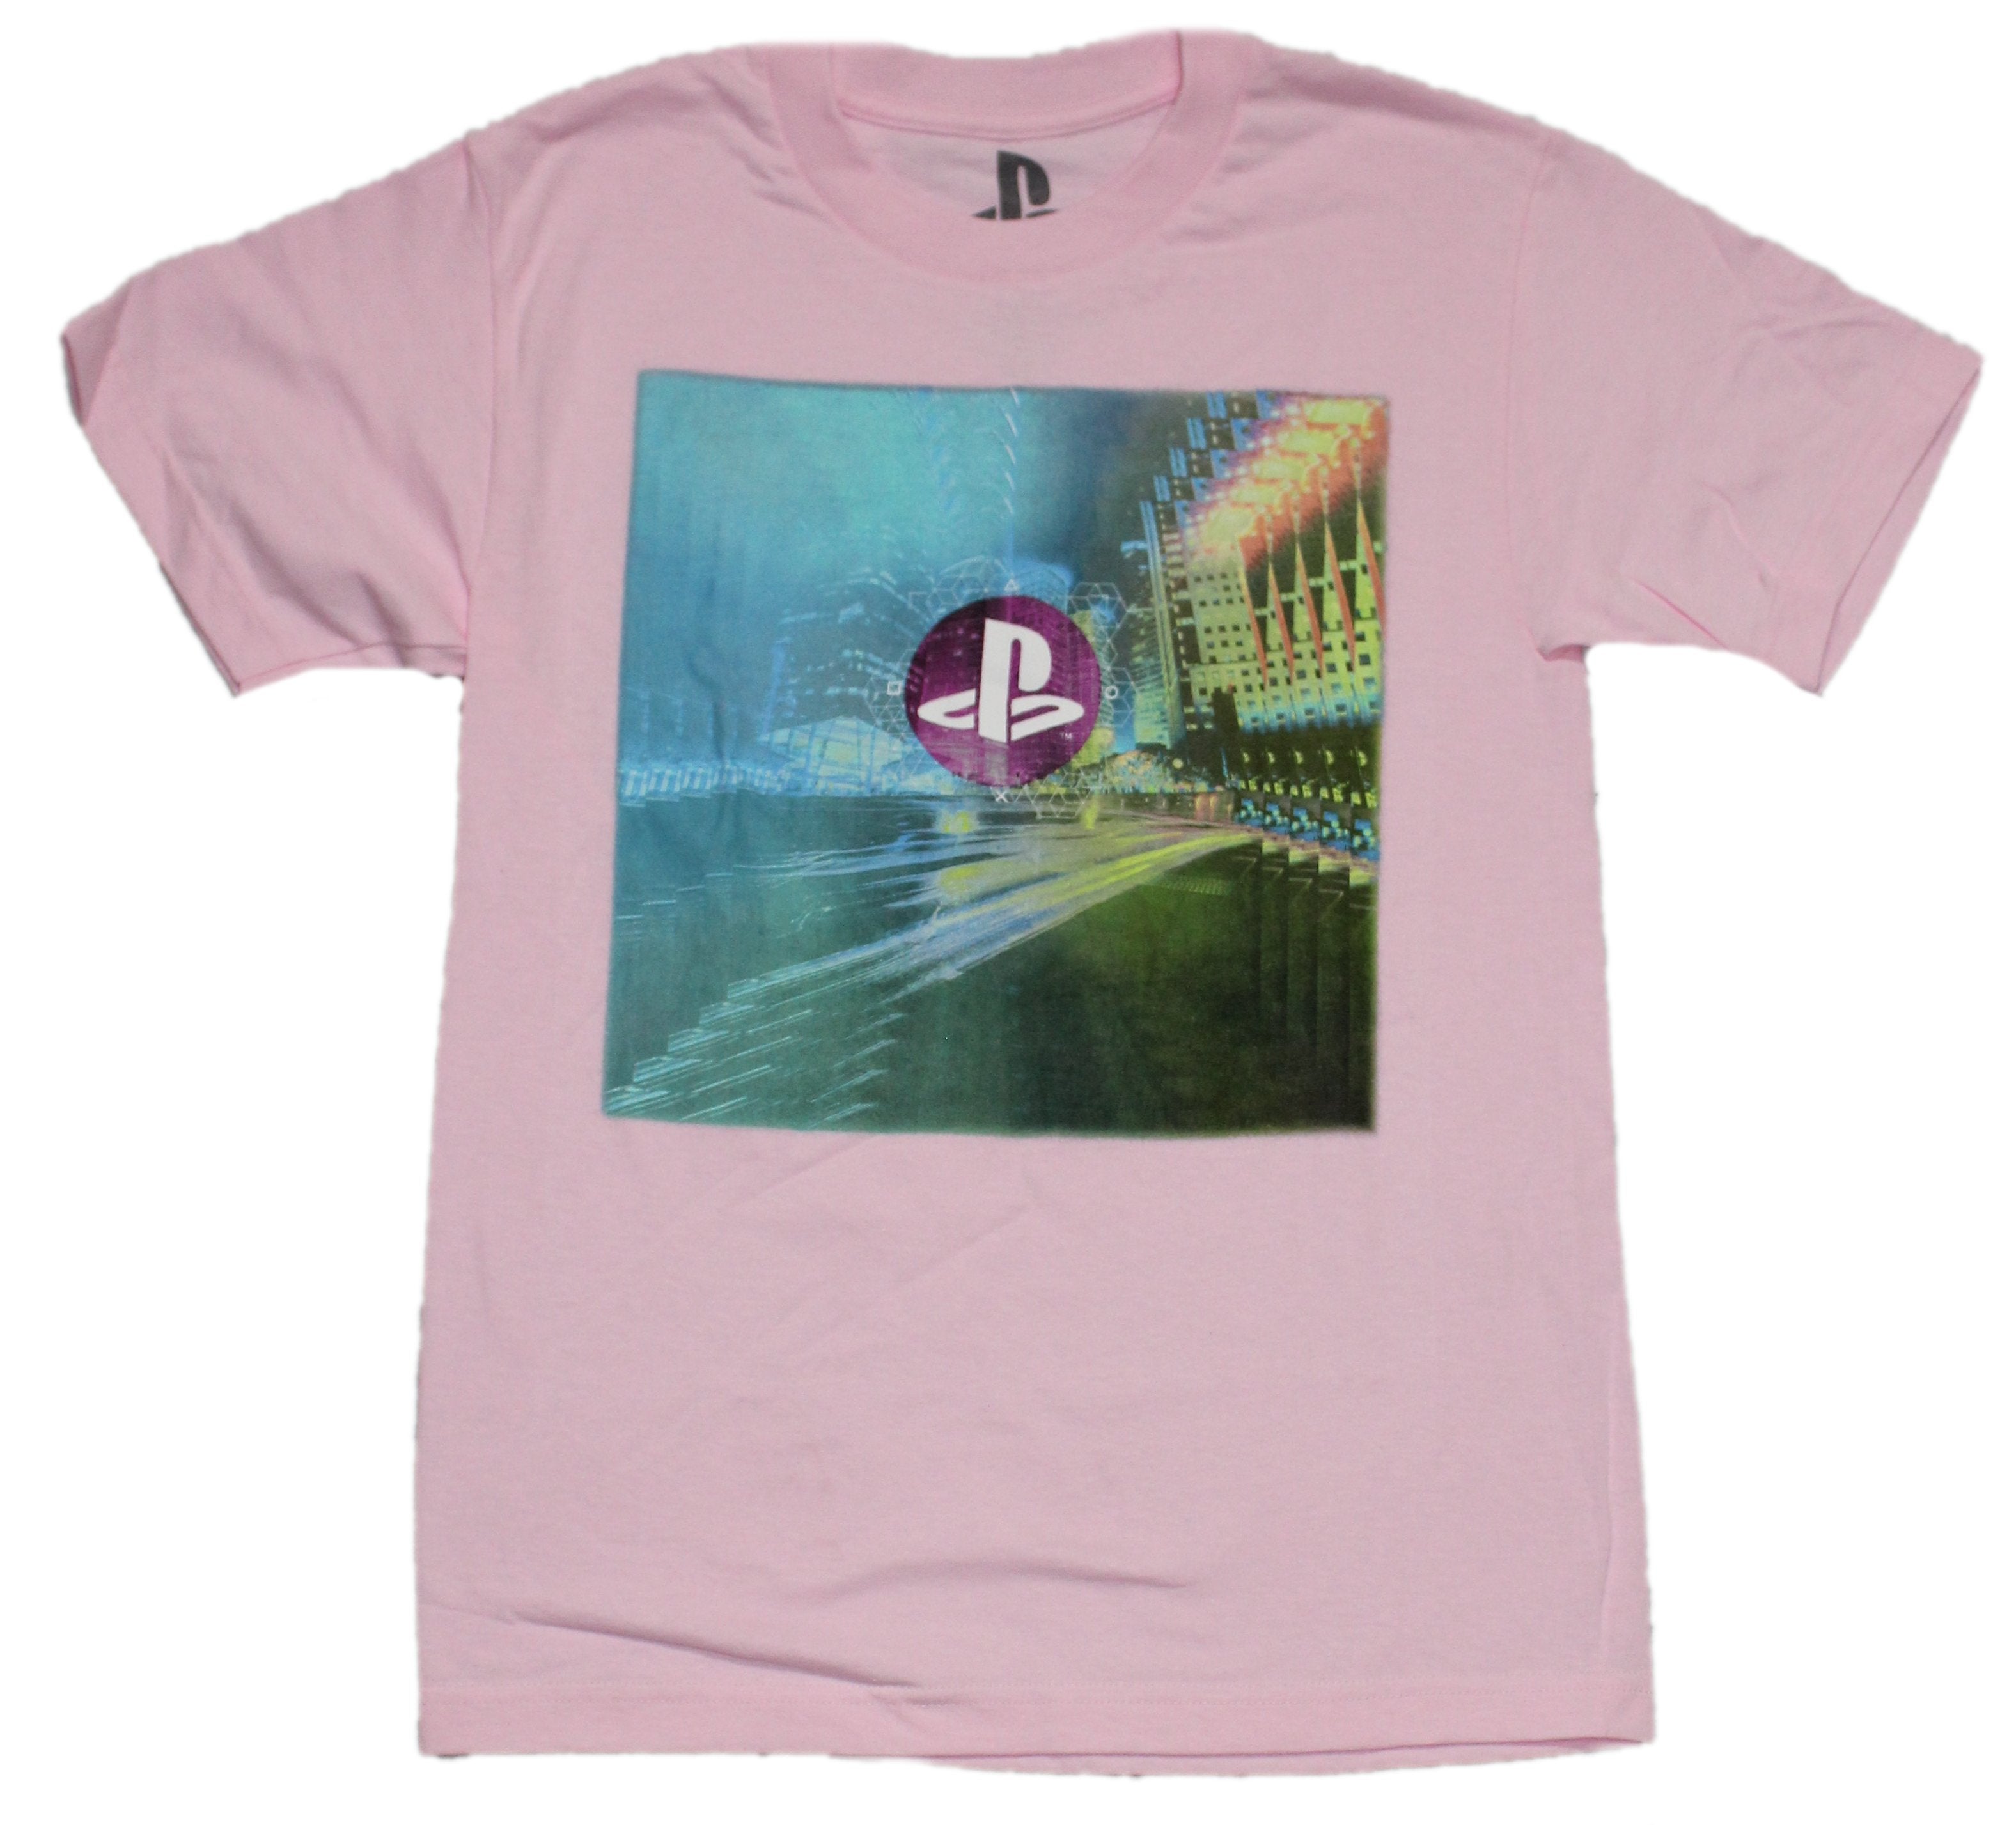 Playstation Mens T-shirt Floating Bubble Logo in City